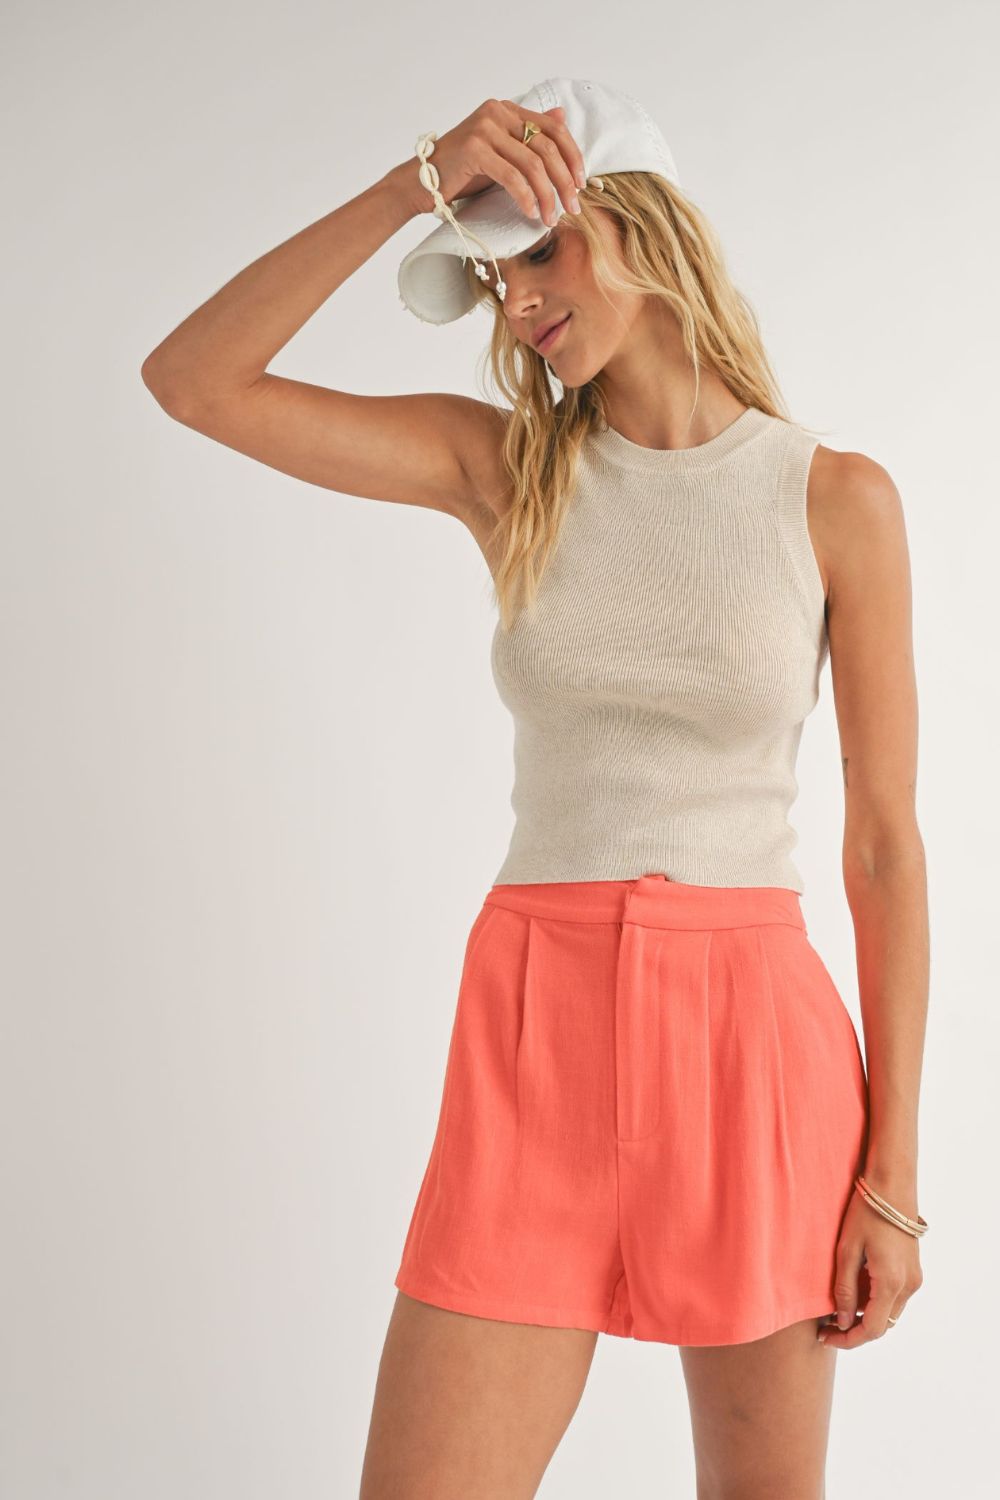 Women's Soft Knit Tank Sweater Top | Neutral Beige - Women's Shirts & Tops - Blooming Daily